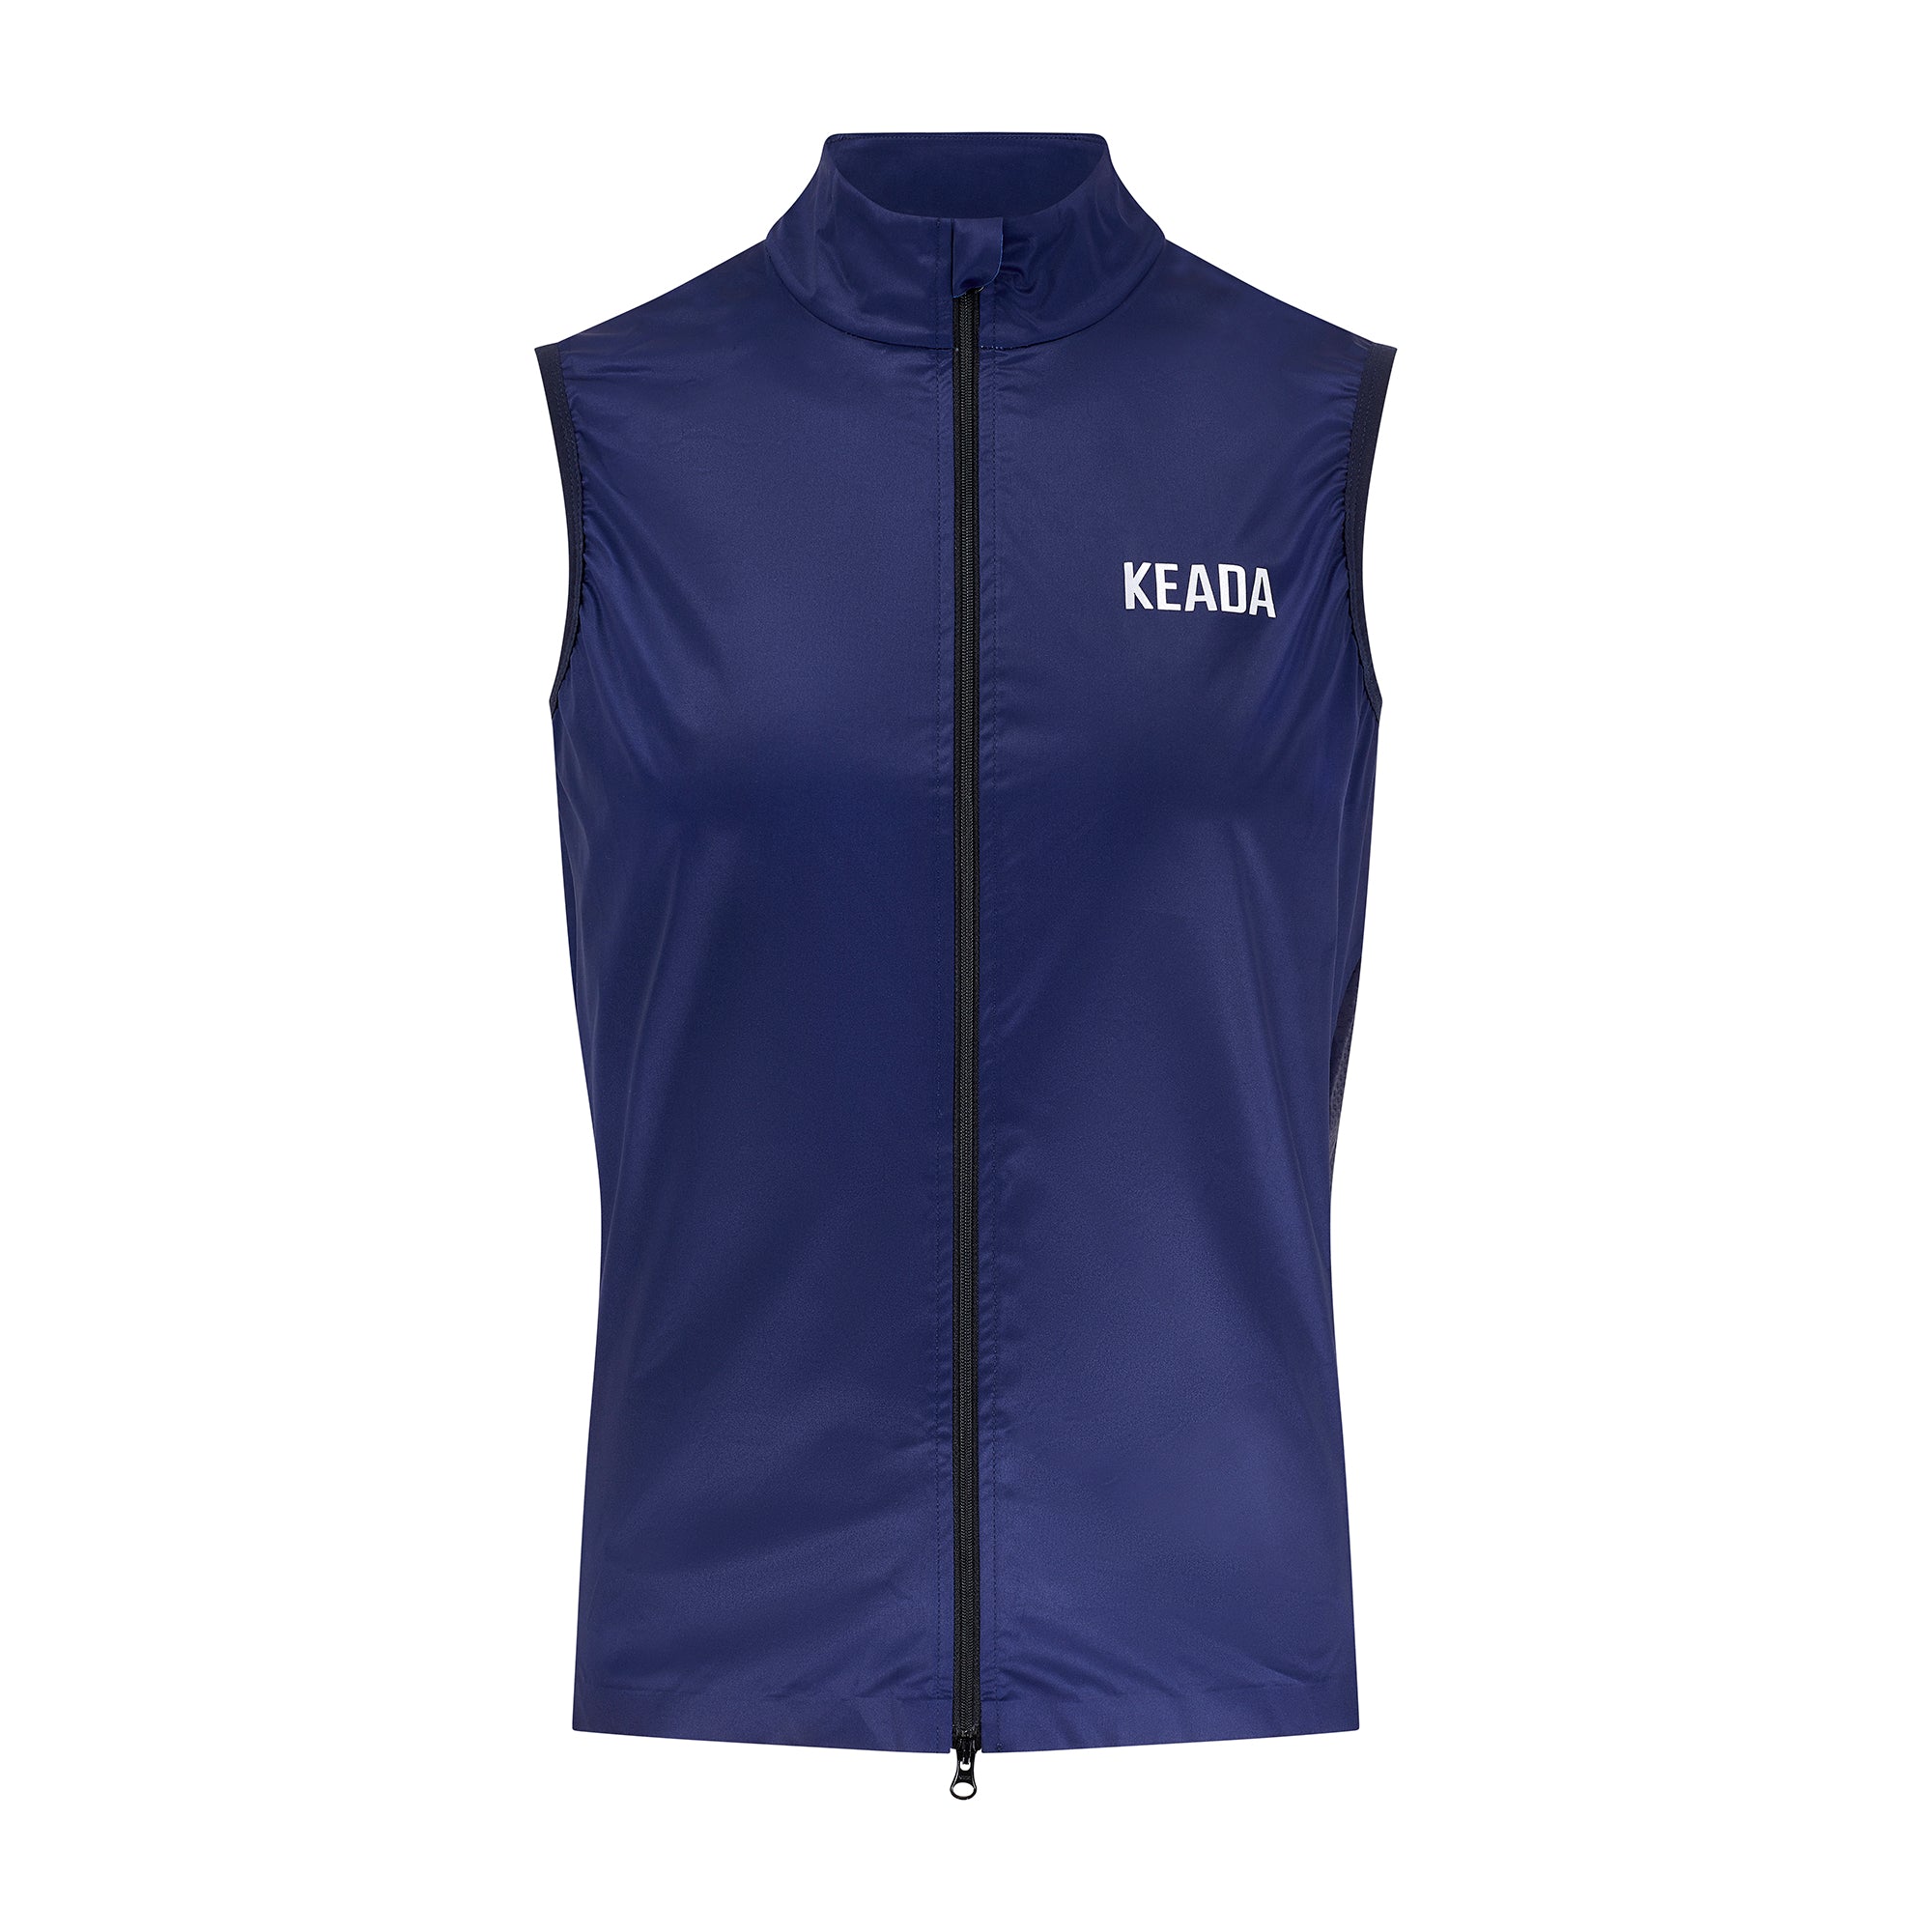 Men's Essential Cycling Gilet - Navy